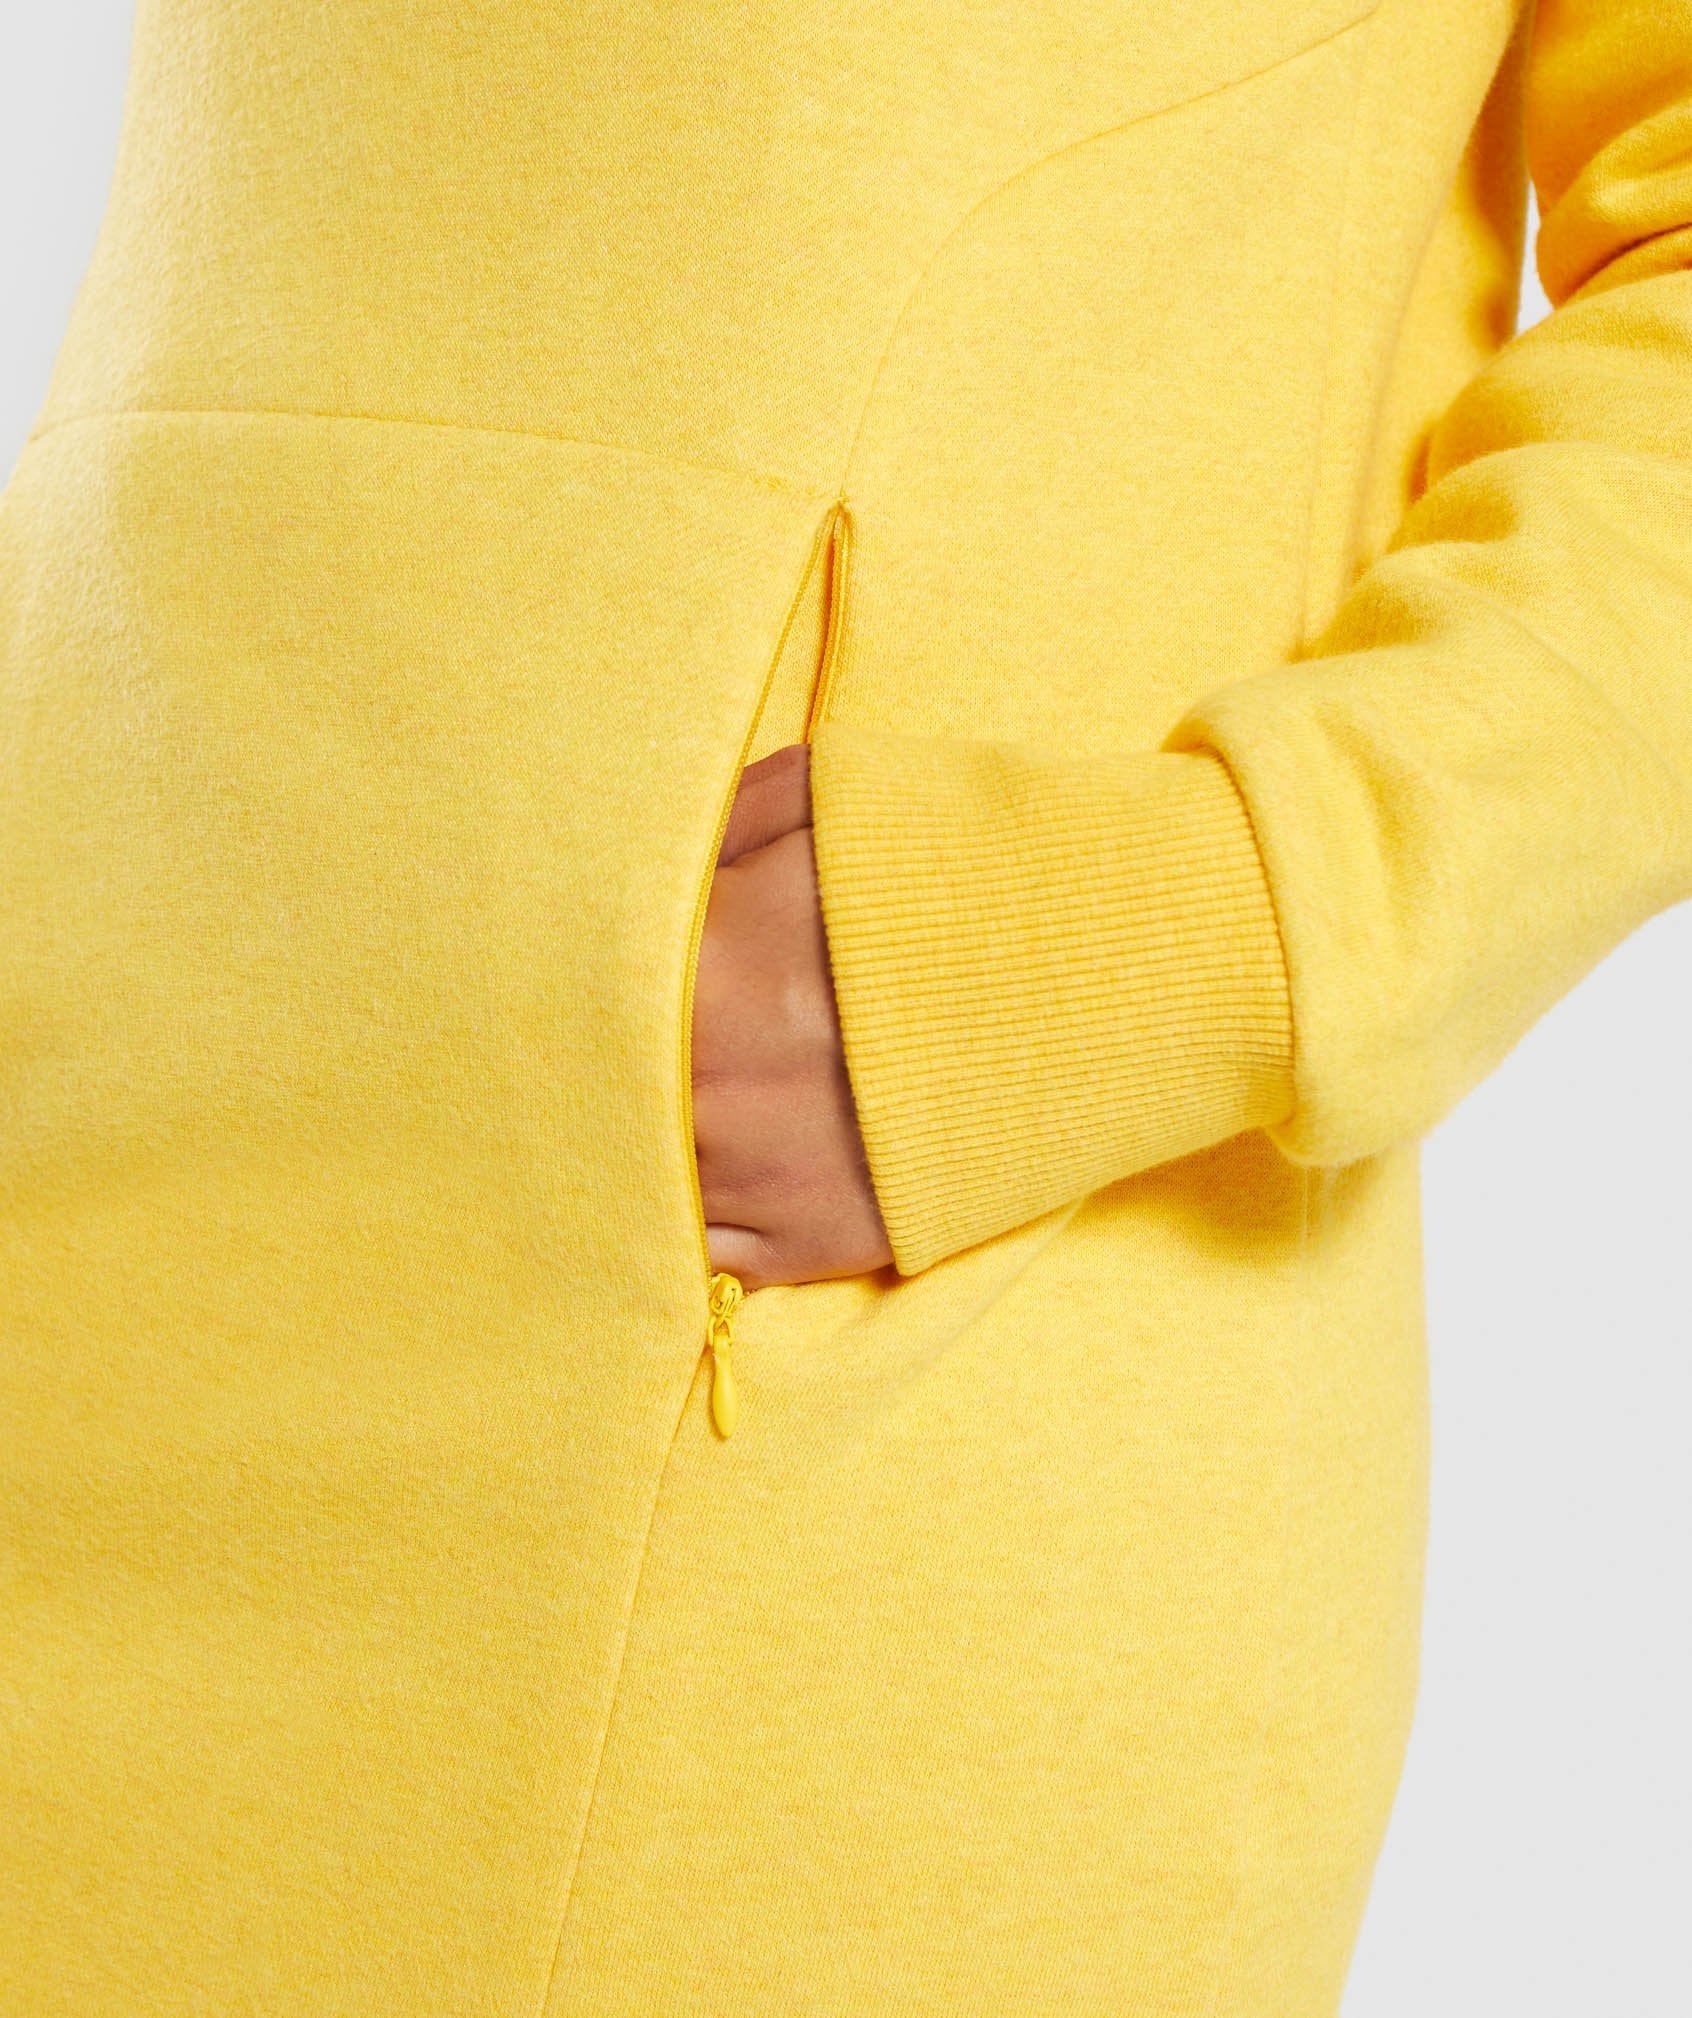 So Soft Sweater in Citrus Yellow Marl - view 6